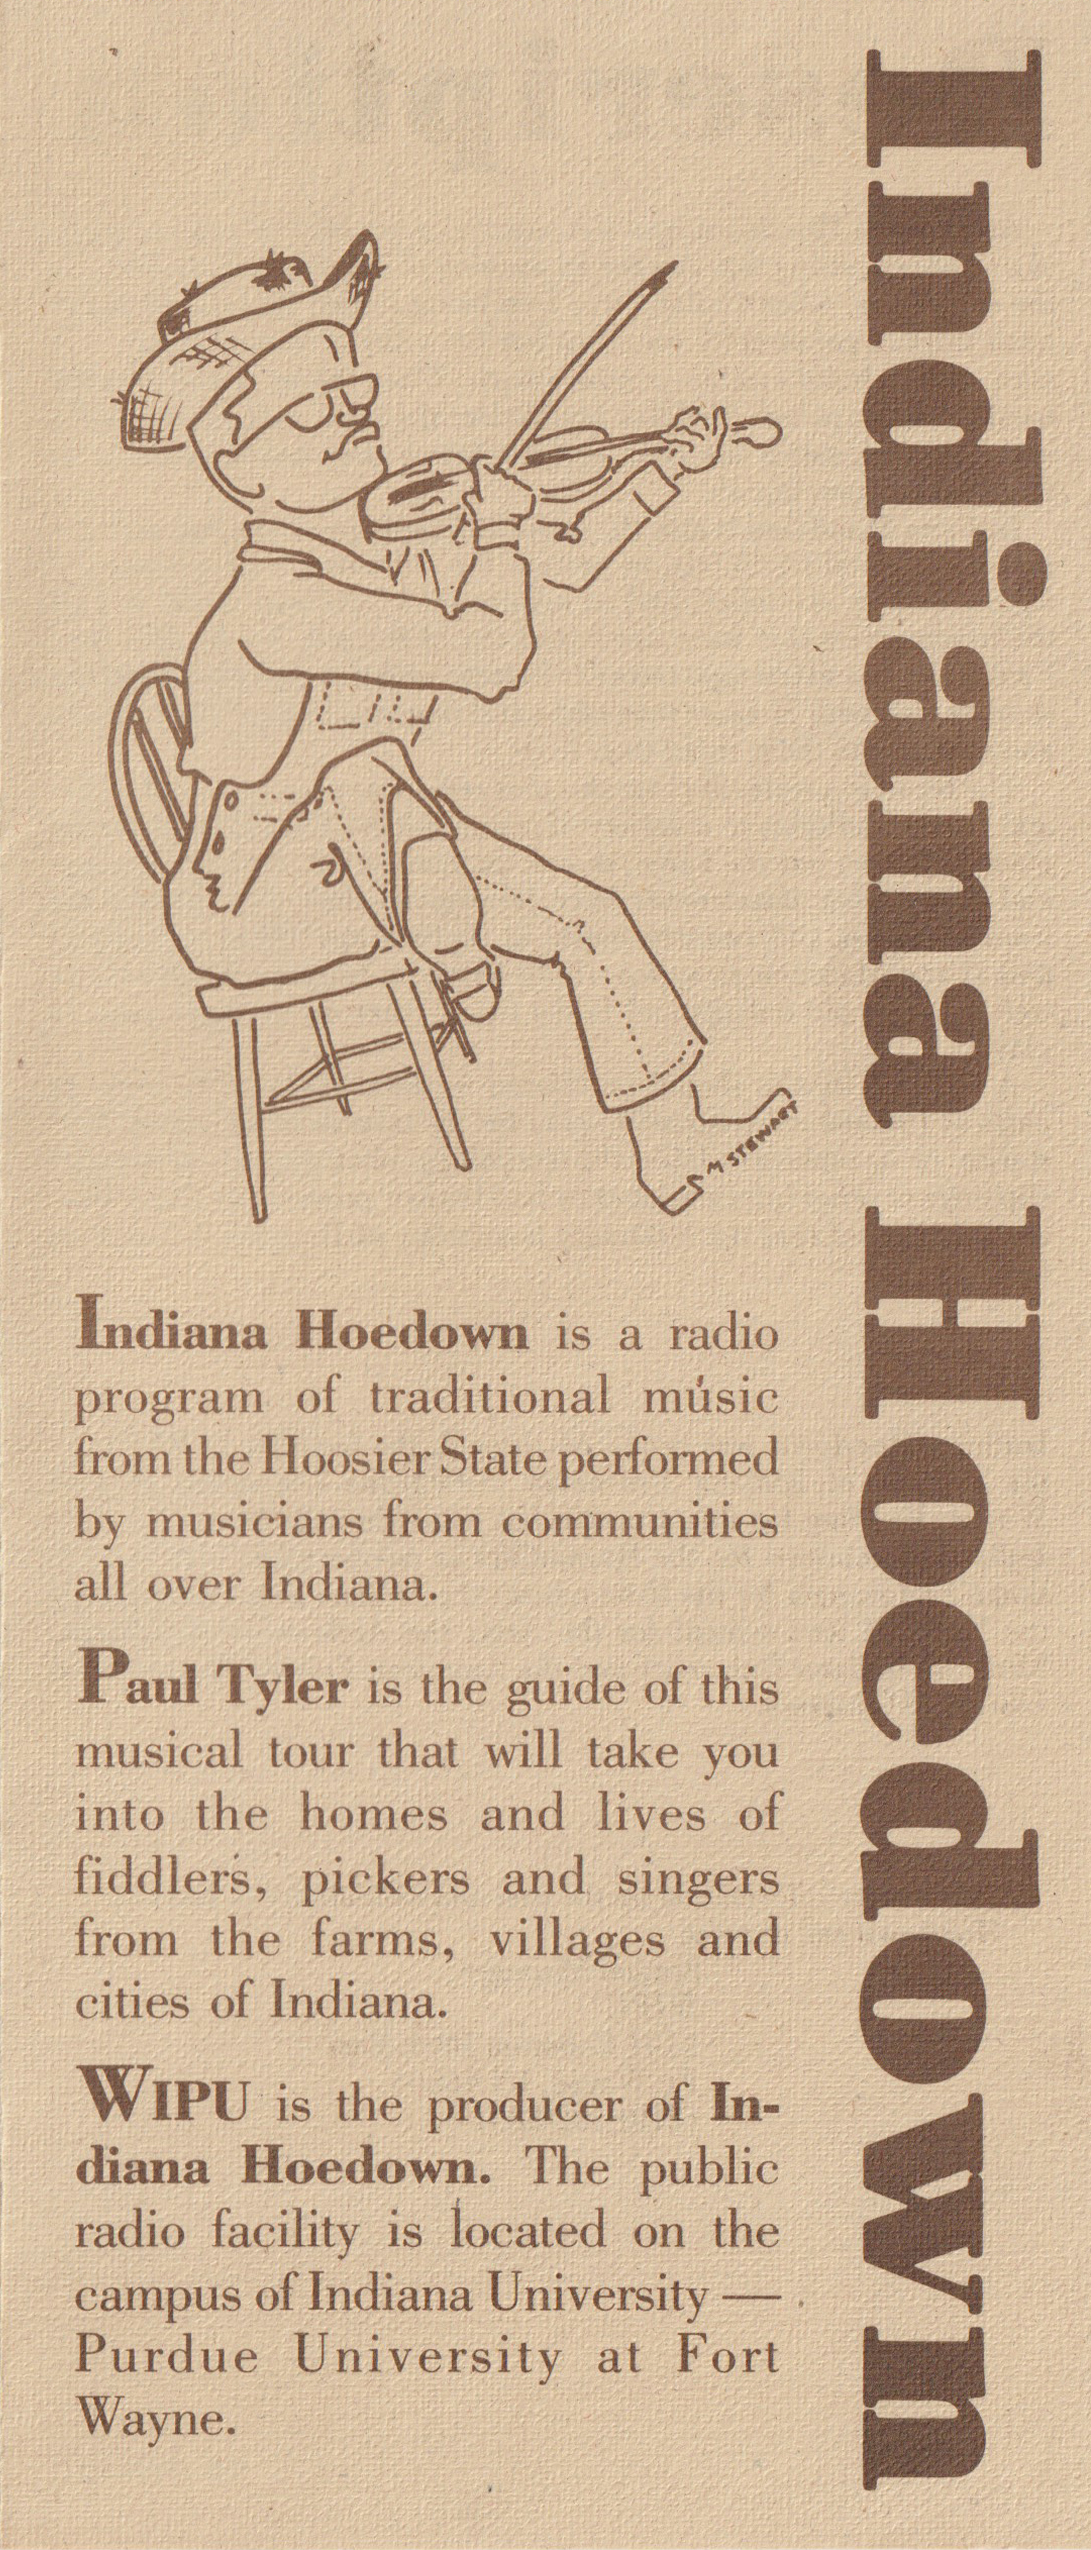 Indiana Hoedown: Traditional Music from the Hoosier State